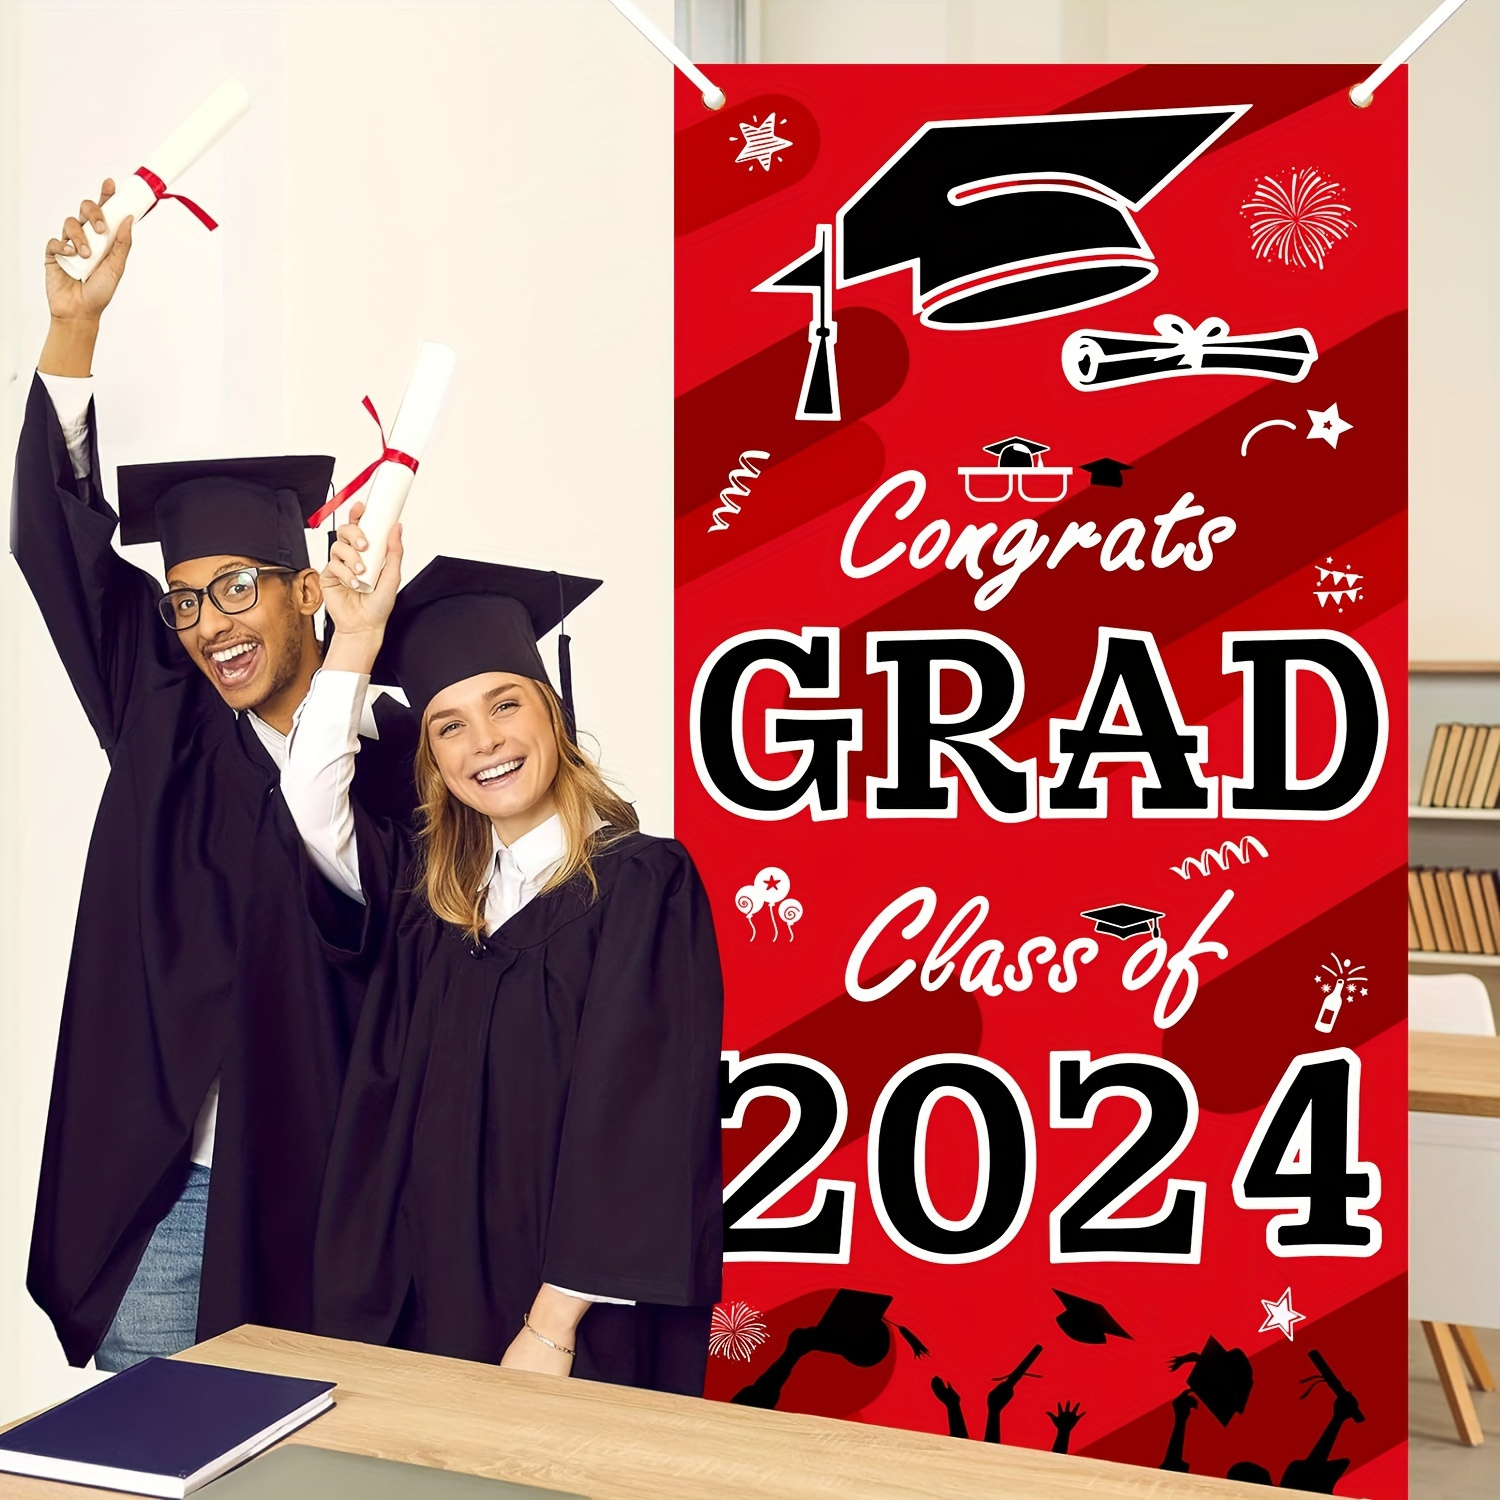 2024 Graduation Decorations, Graduation Decorations Class of 2024, Red and  Black Graduation Party Decorations with Congratulations GRADUATE Banner